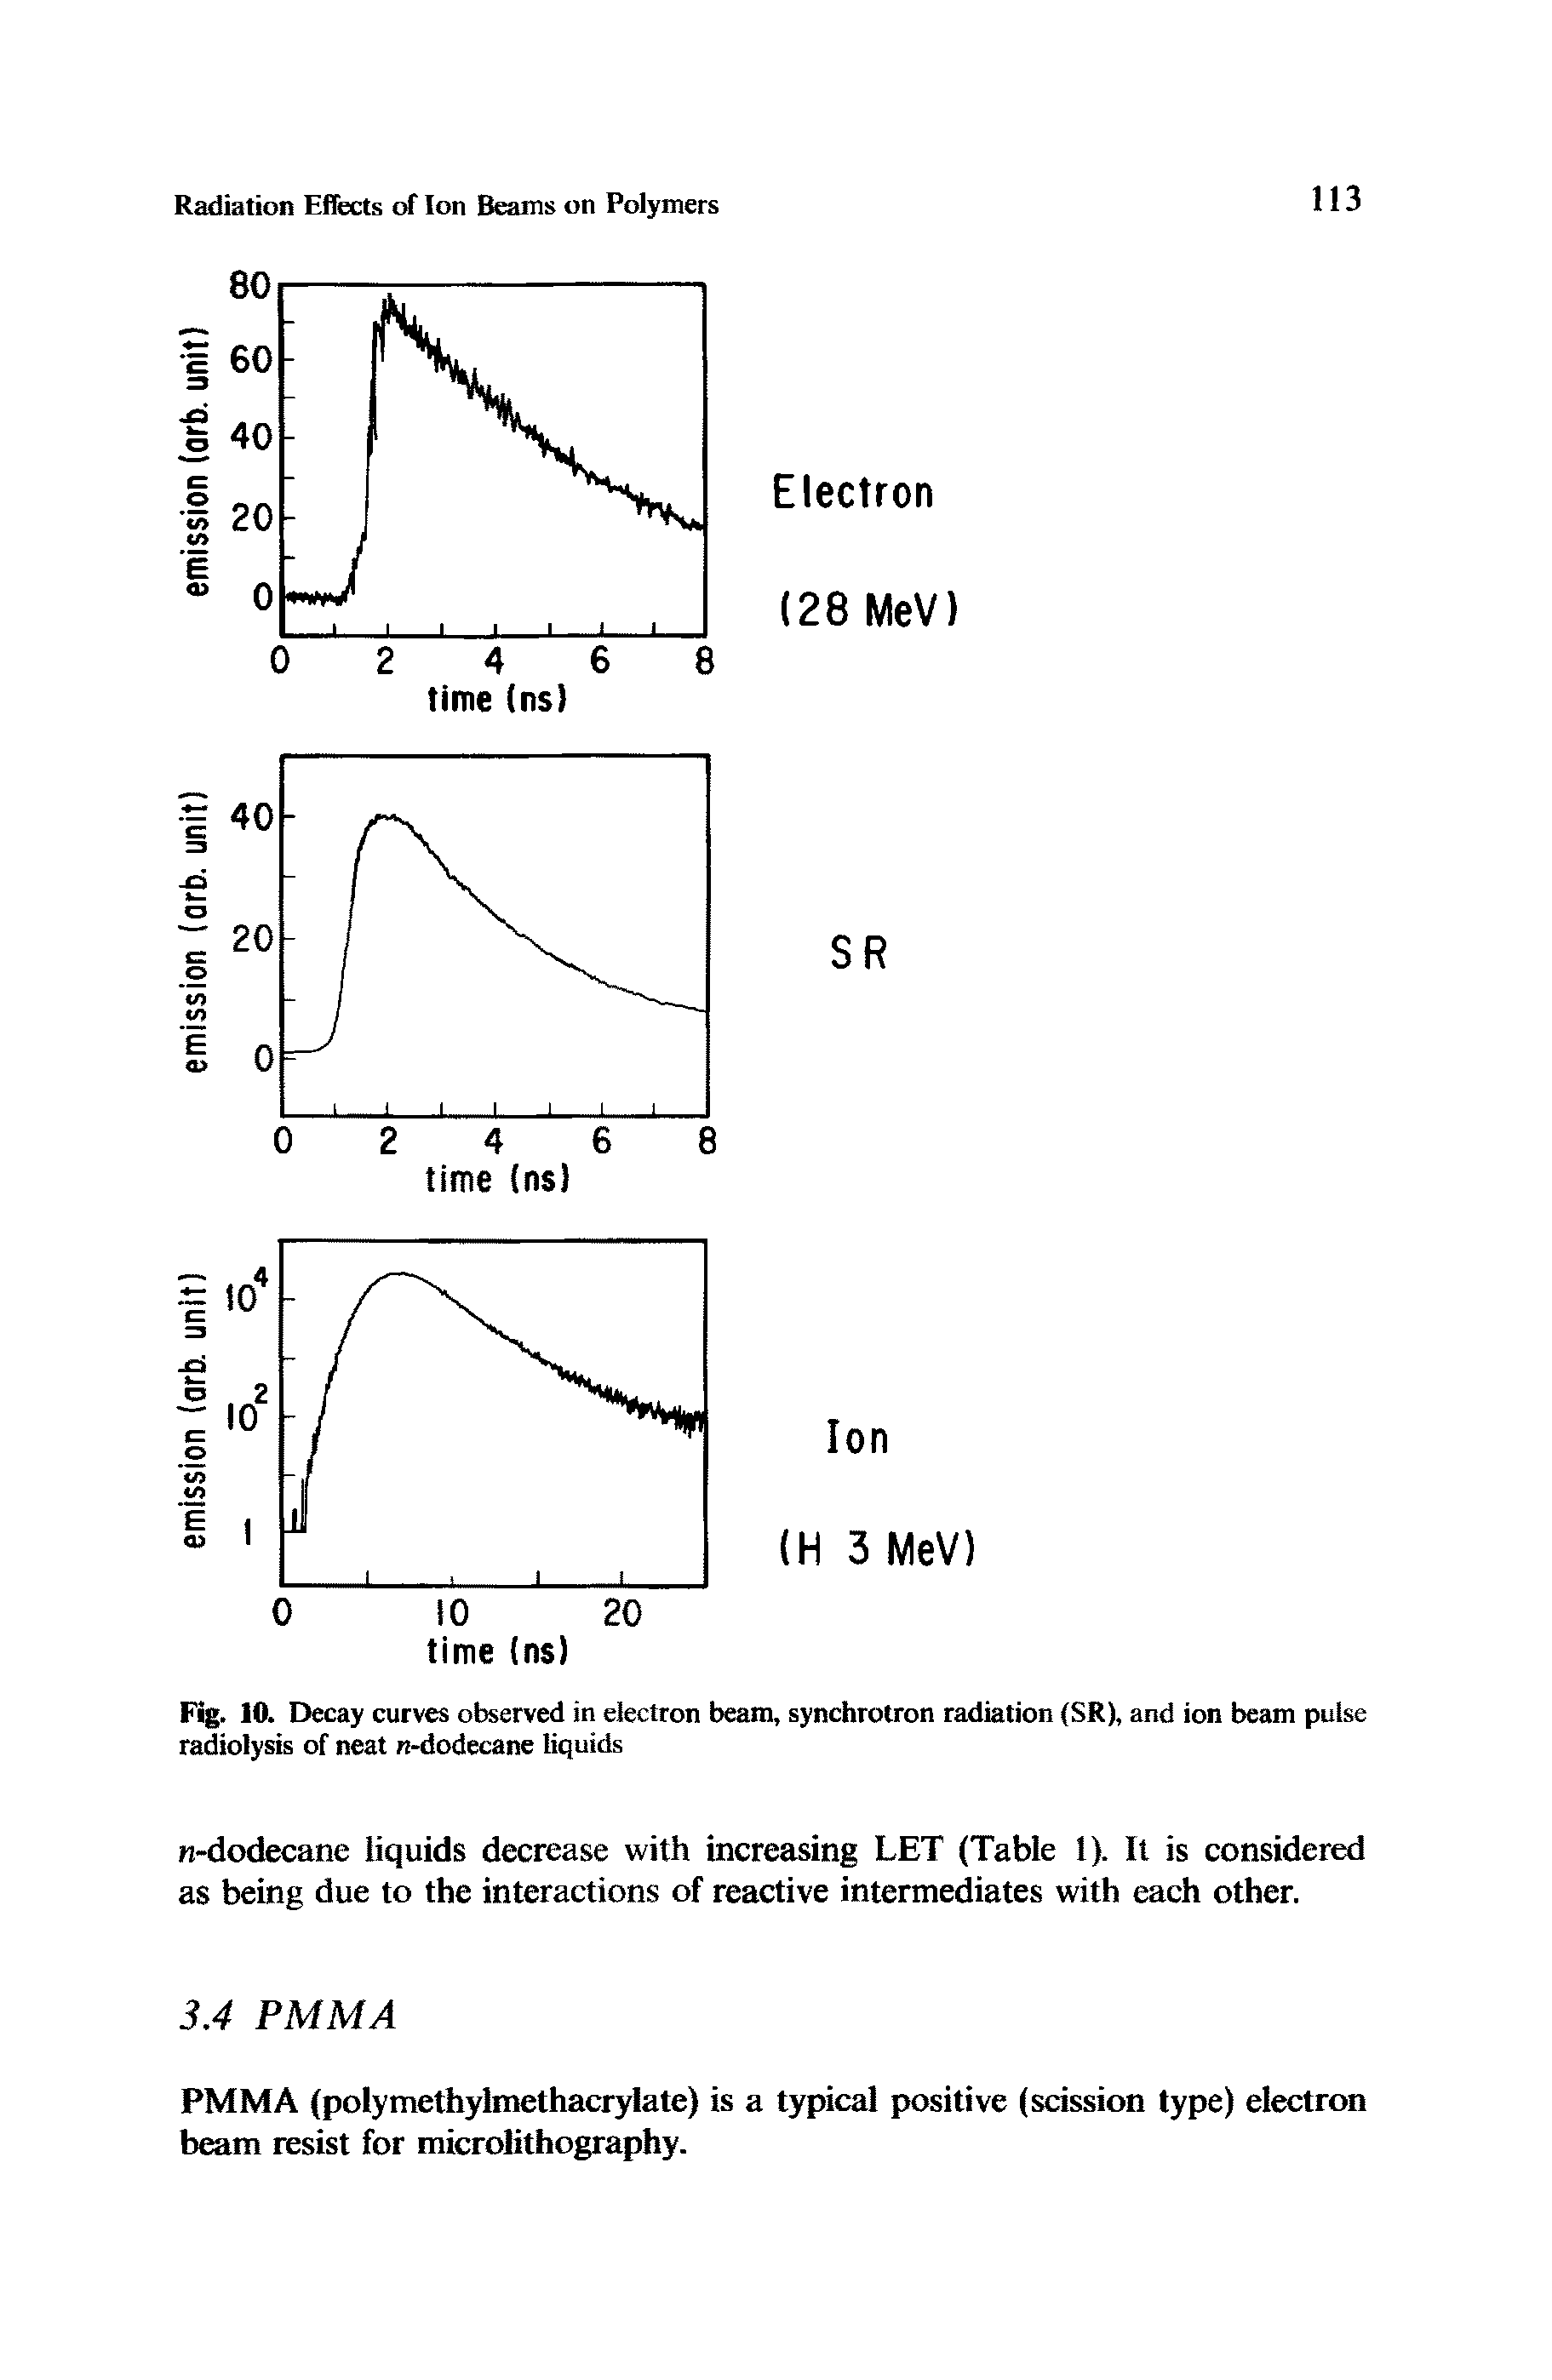 Fig. 10. Decay curves observed in electron beam, synchrotron radiation (SR), and ion beam pulse radiolysis of neat n-dodecane liquids...